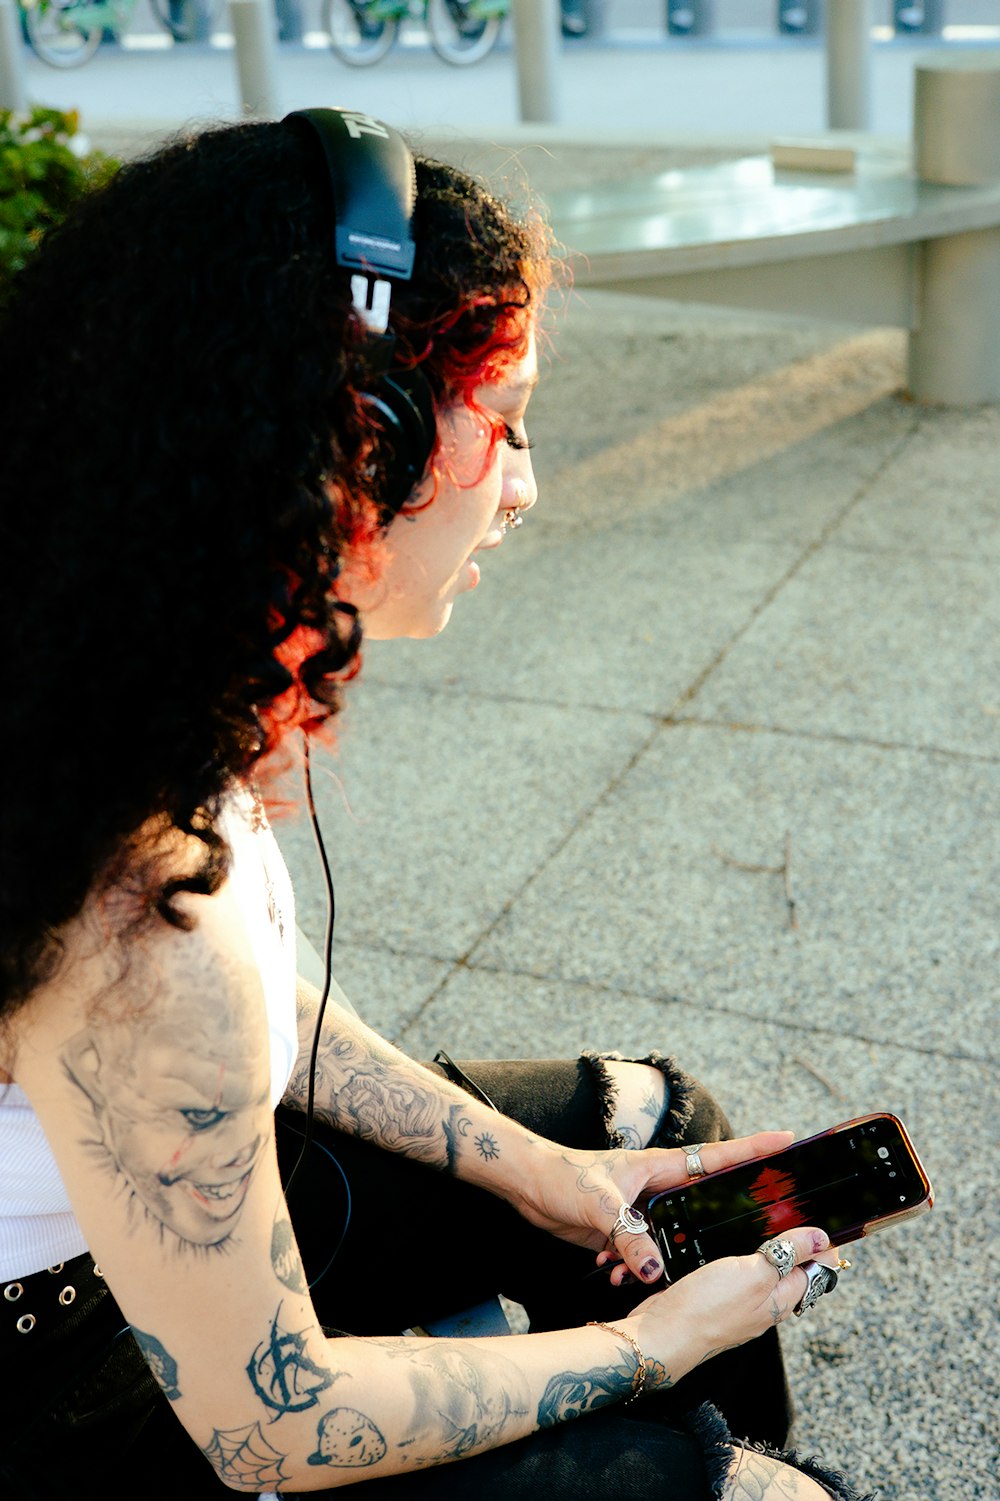 a woman sitting on the ground with headphones on